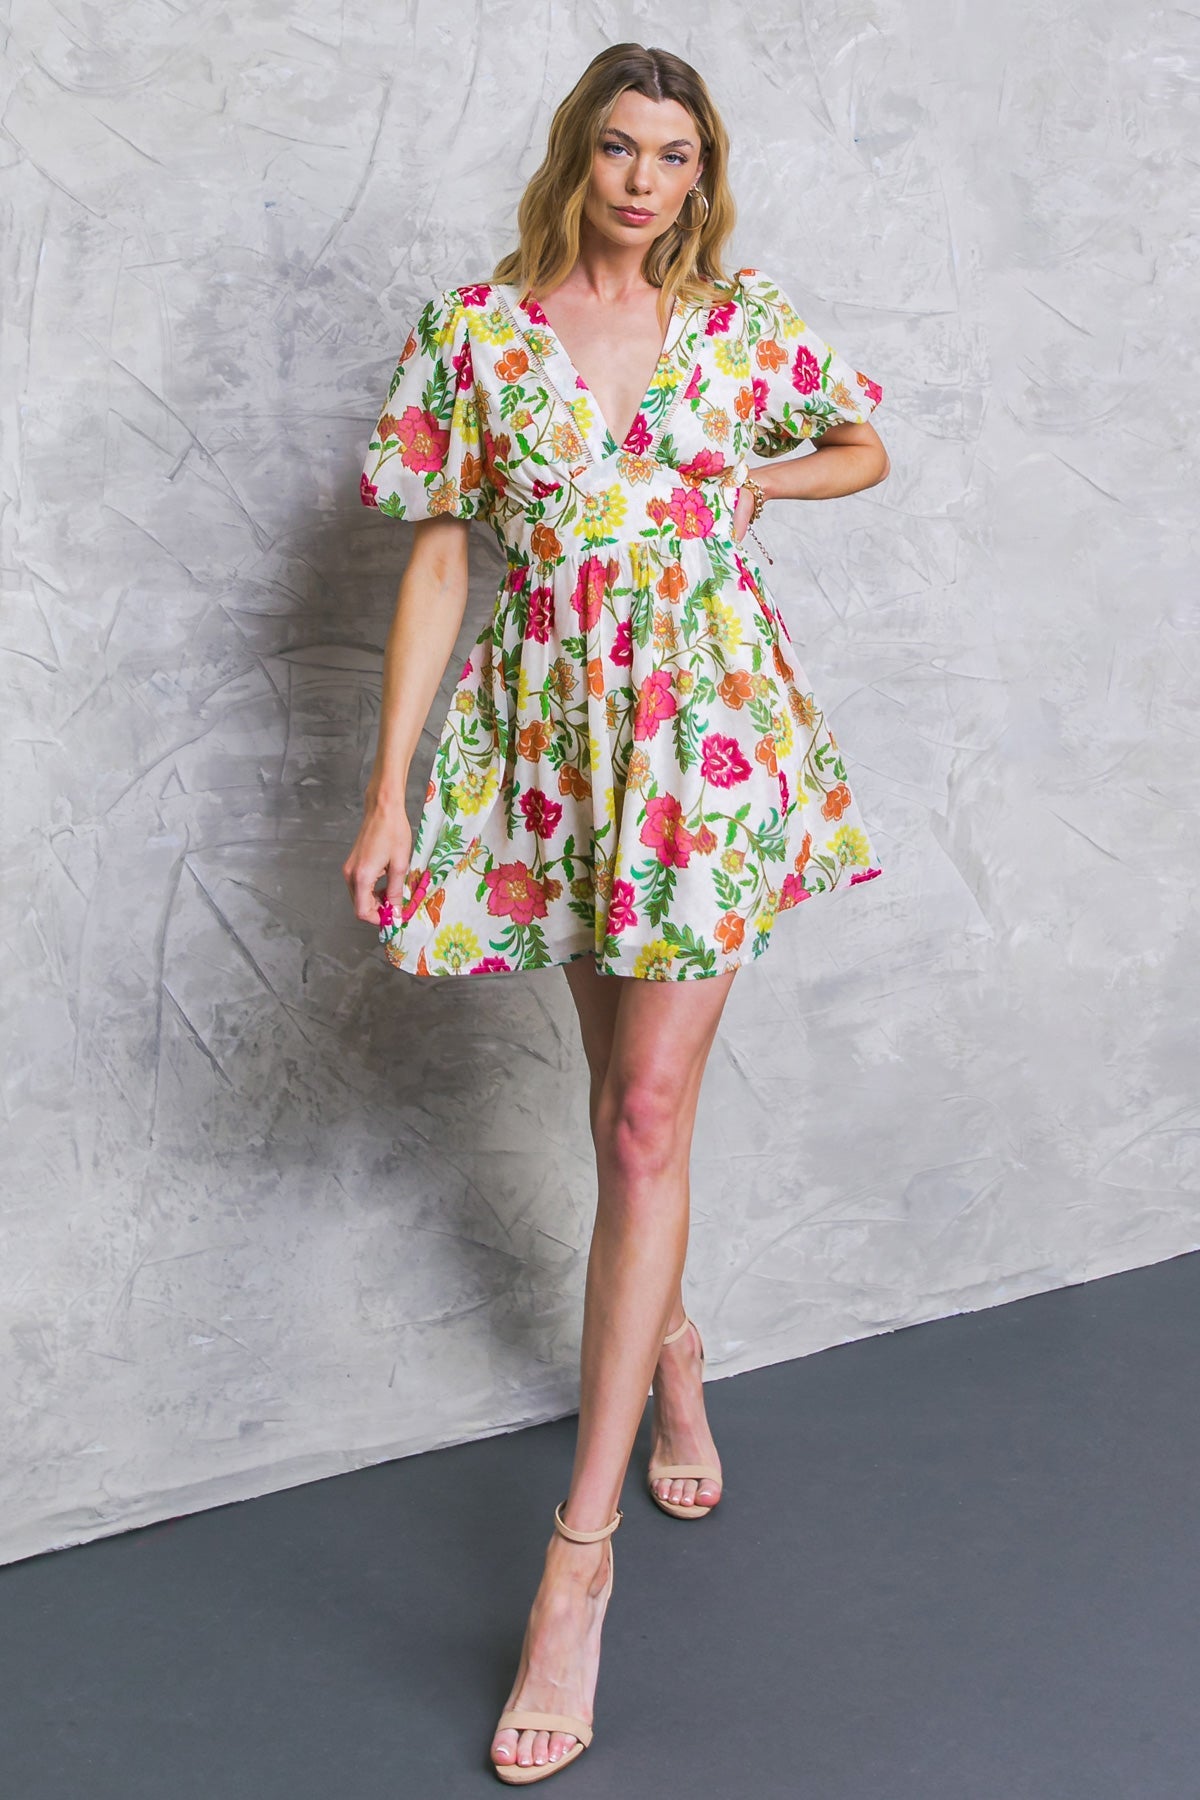 FREE ME TODAY FLORAL WOVEN MINI DRESS